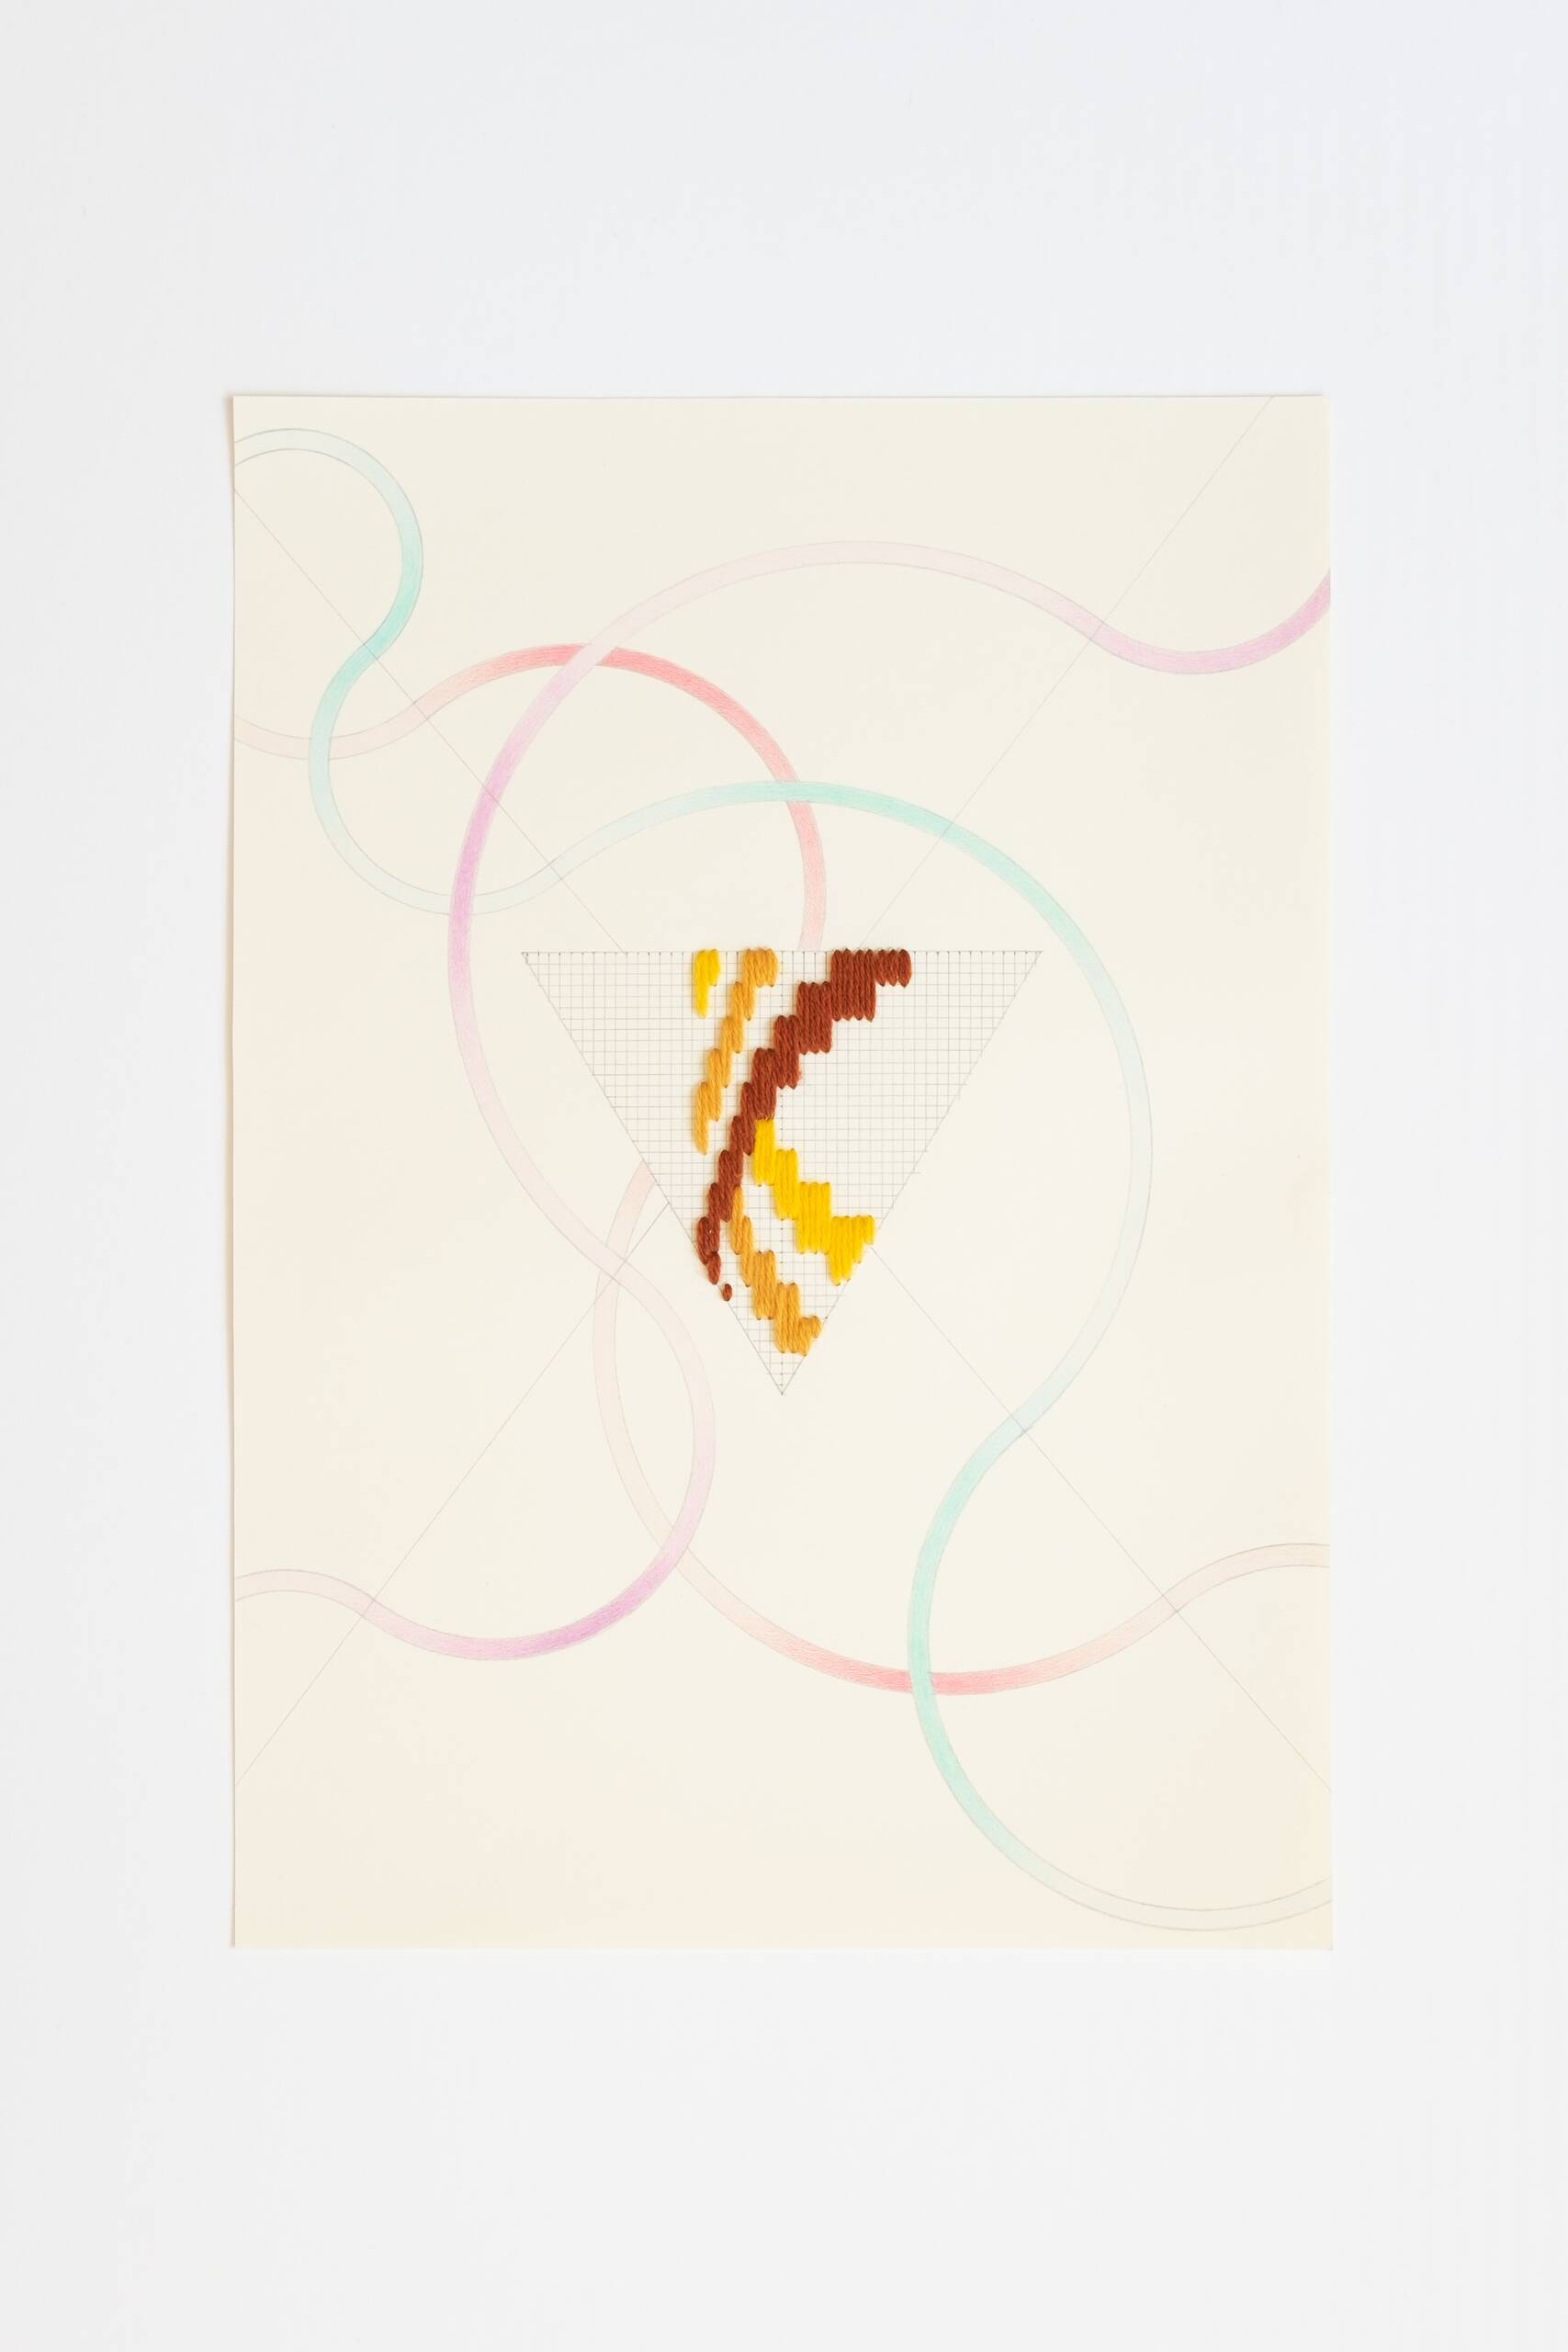 Bargello triangle [gold on yellow], Hand-embroidered wool yarn, pencil and colored pencil on 170 gsm paper, 2021